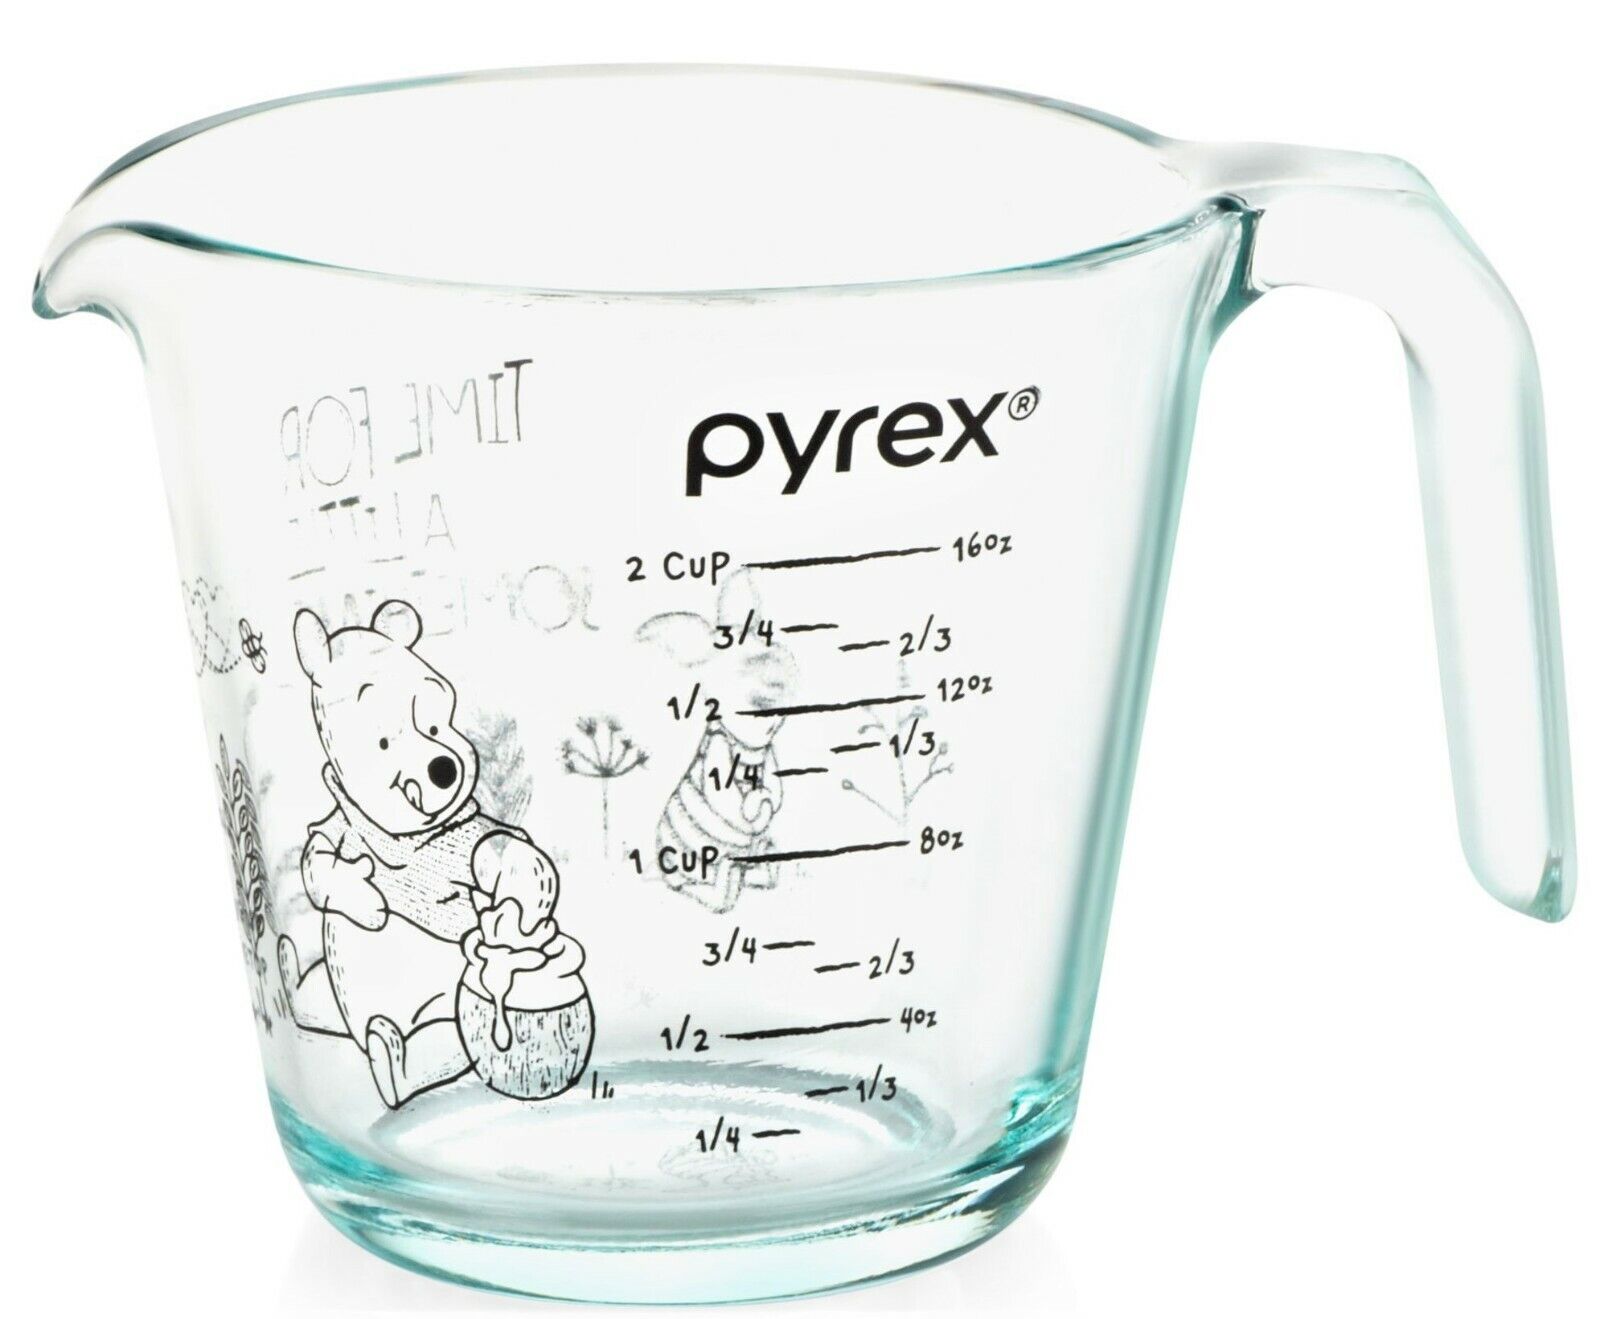 Winnie The Pooh Bear Piglet Disney Pyrex 16 Ounce 2 Cups Measuring Cup NEW